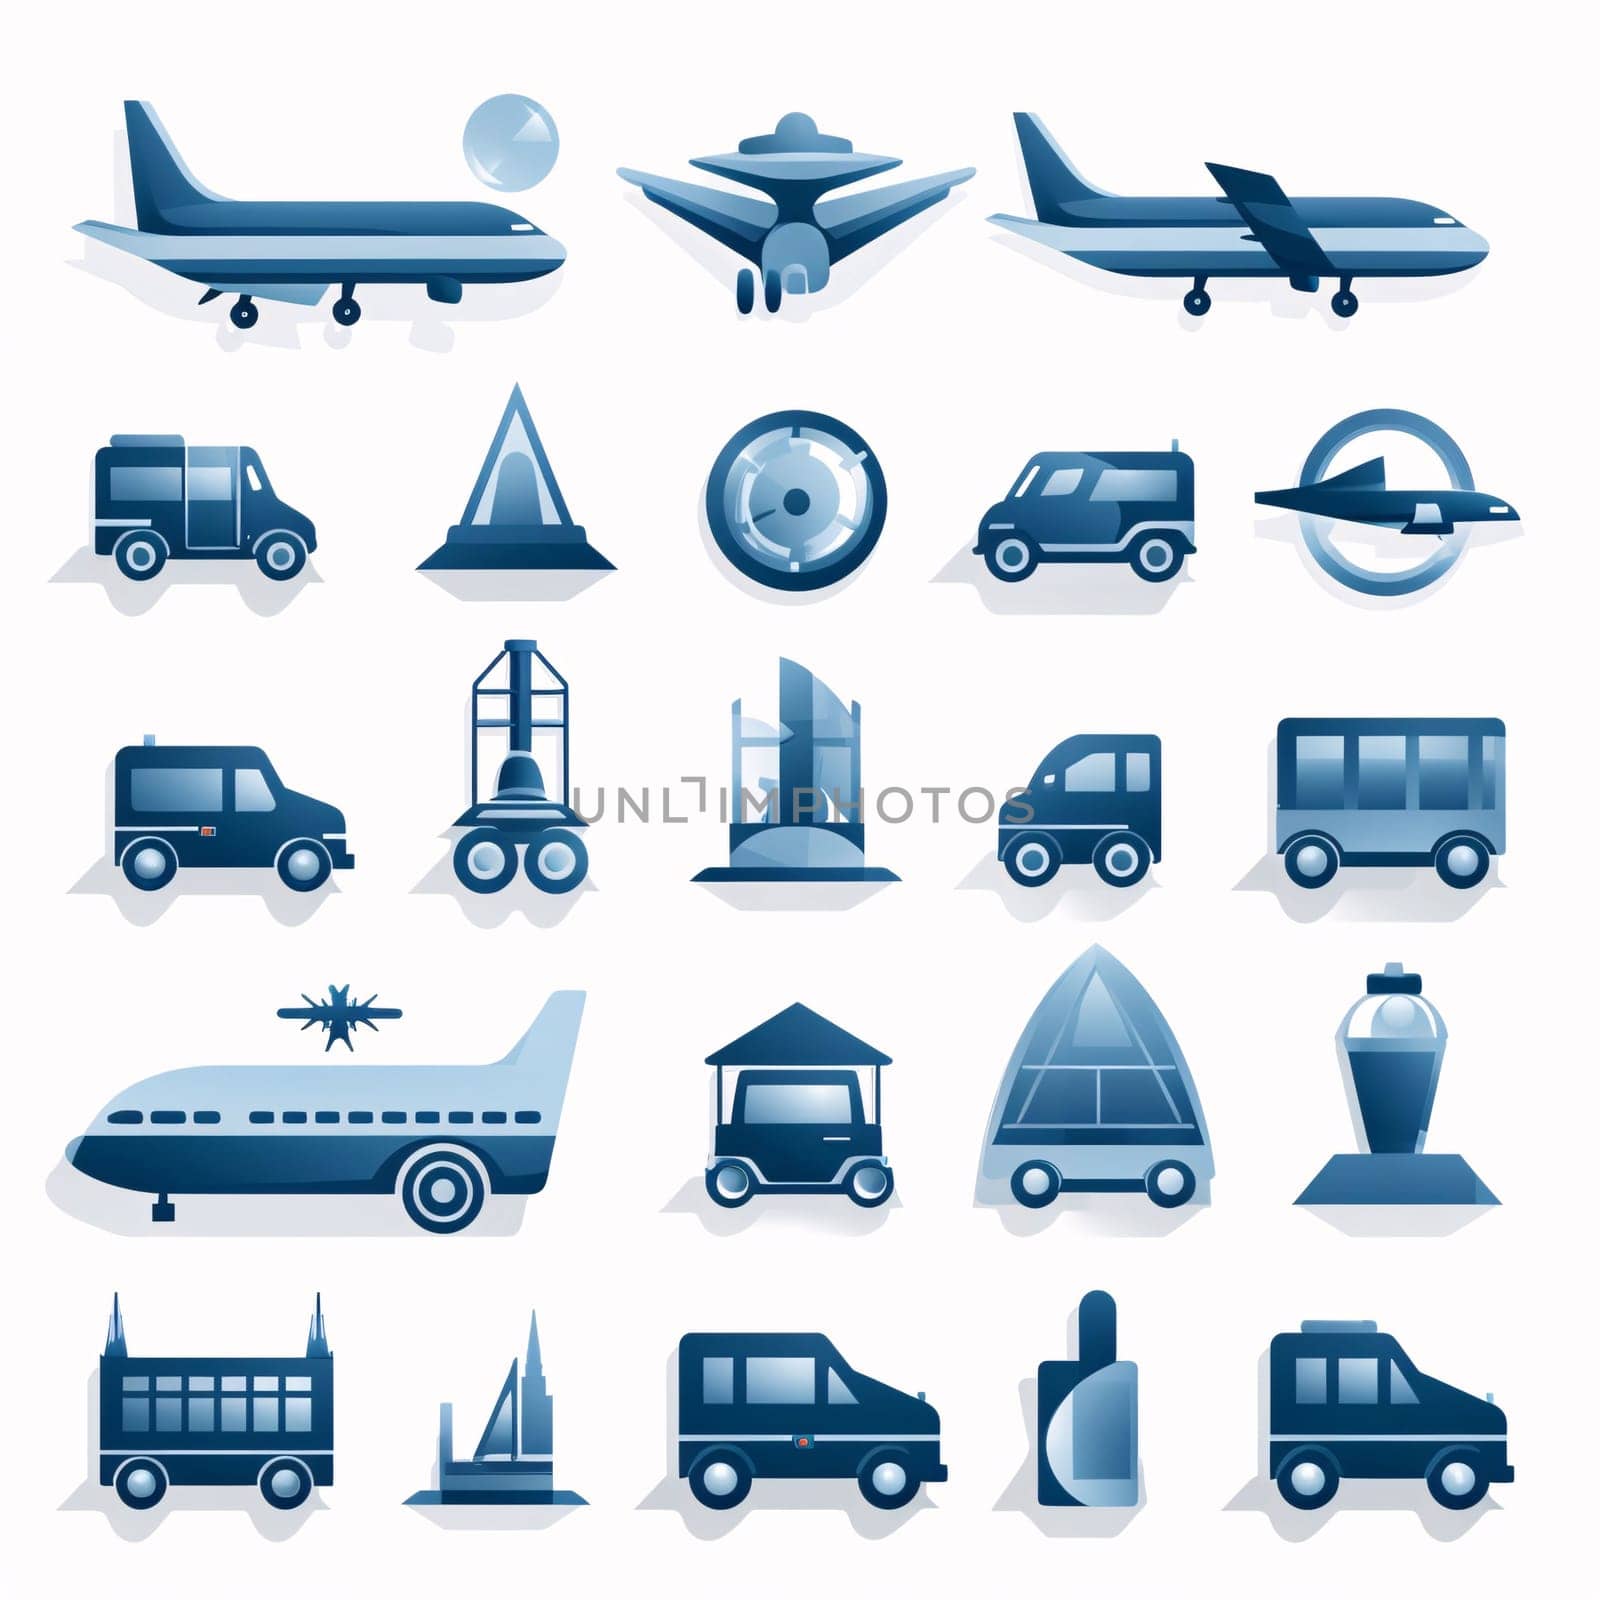 New icons collection: Transport icons set with airplane, bus, truck, plane, train, plane, ship, truck, bus, ship, bus, helicopter, airplane, ship, ship, ship, ship, ship, car, ship.